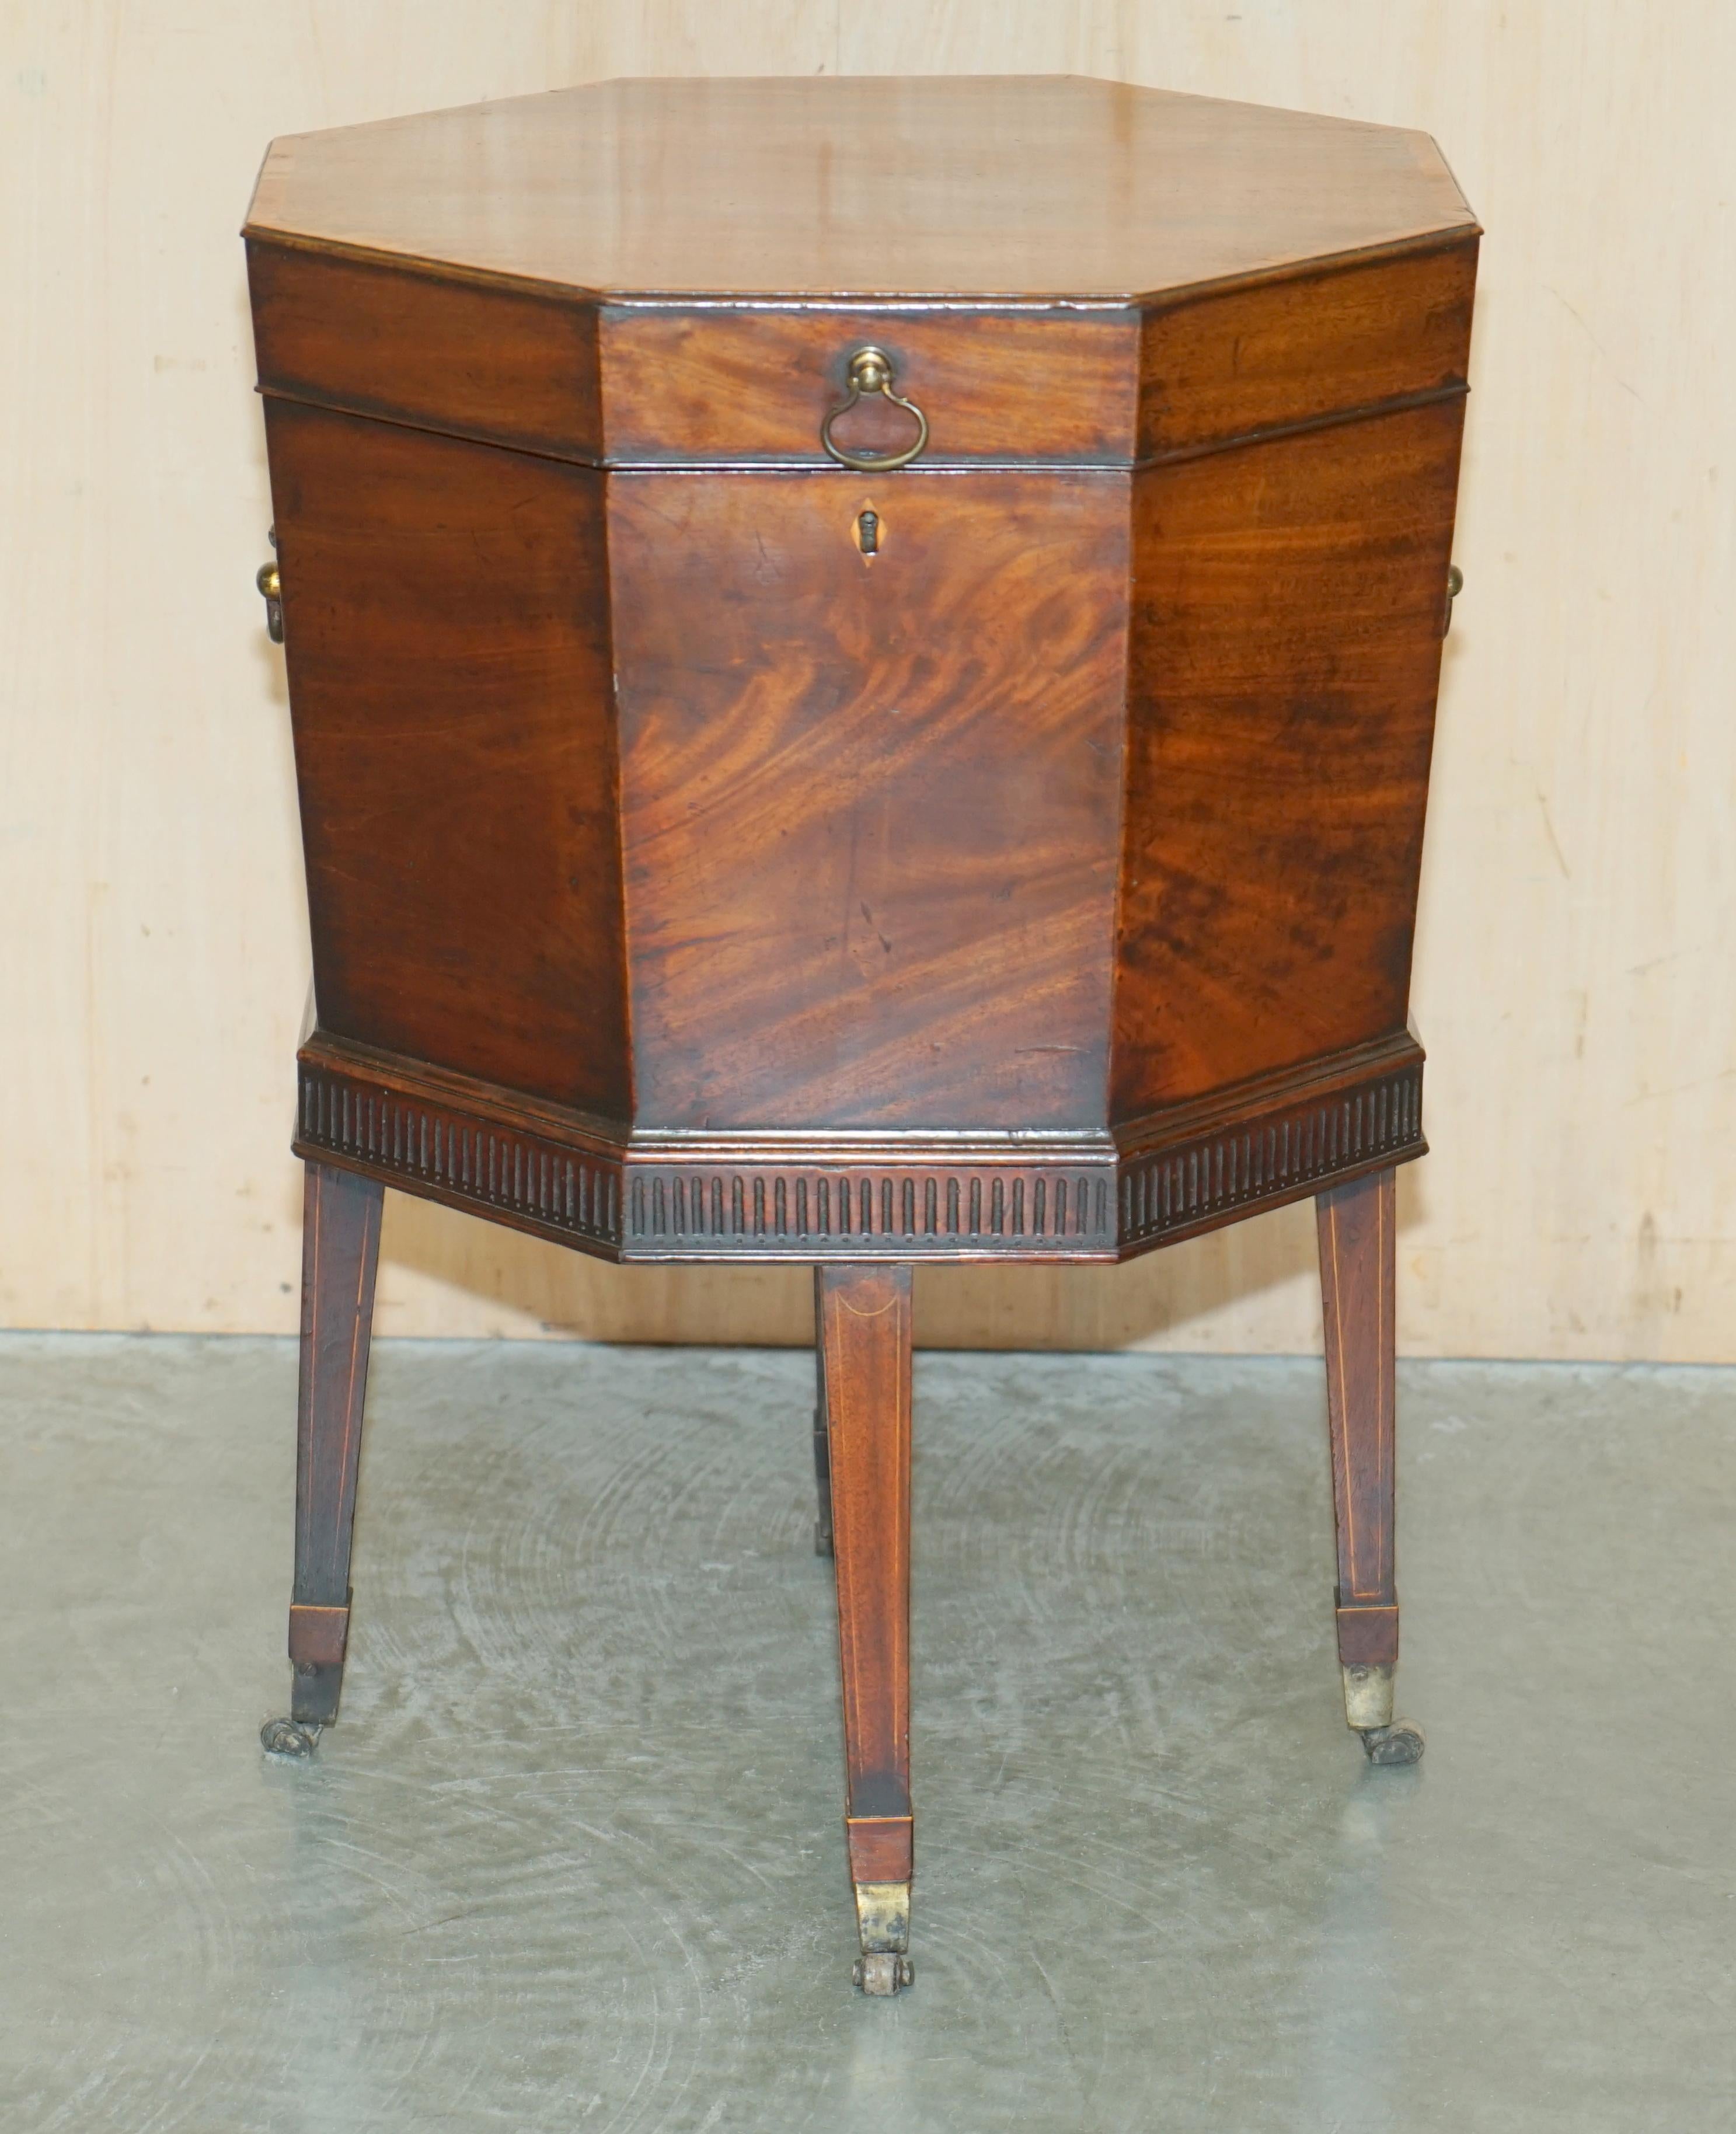 English Very Rare Antique Fully Restored George III 1780 Hardwood Wine Cooler Cellarette For Sale